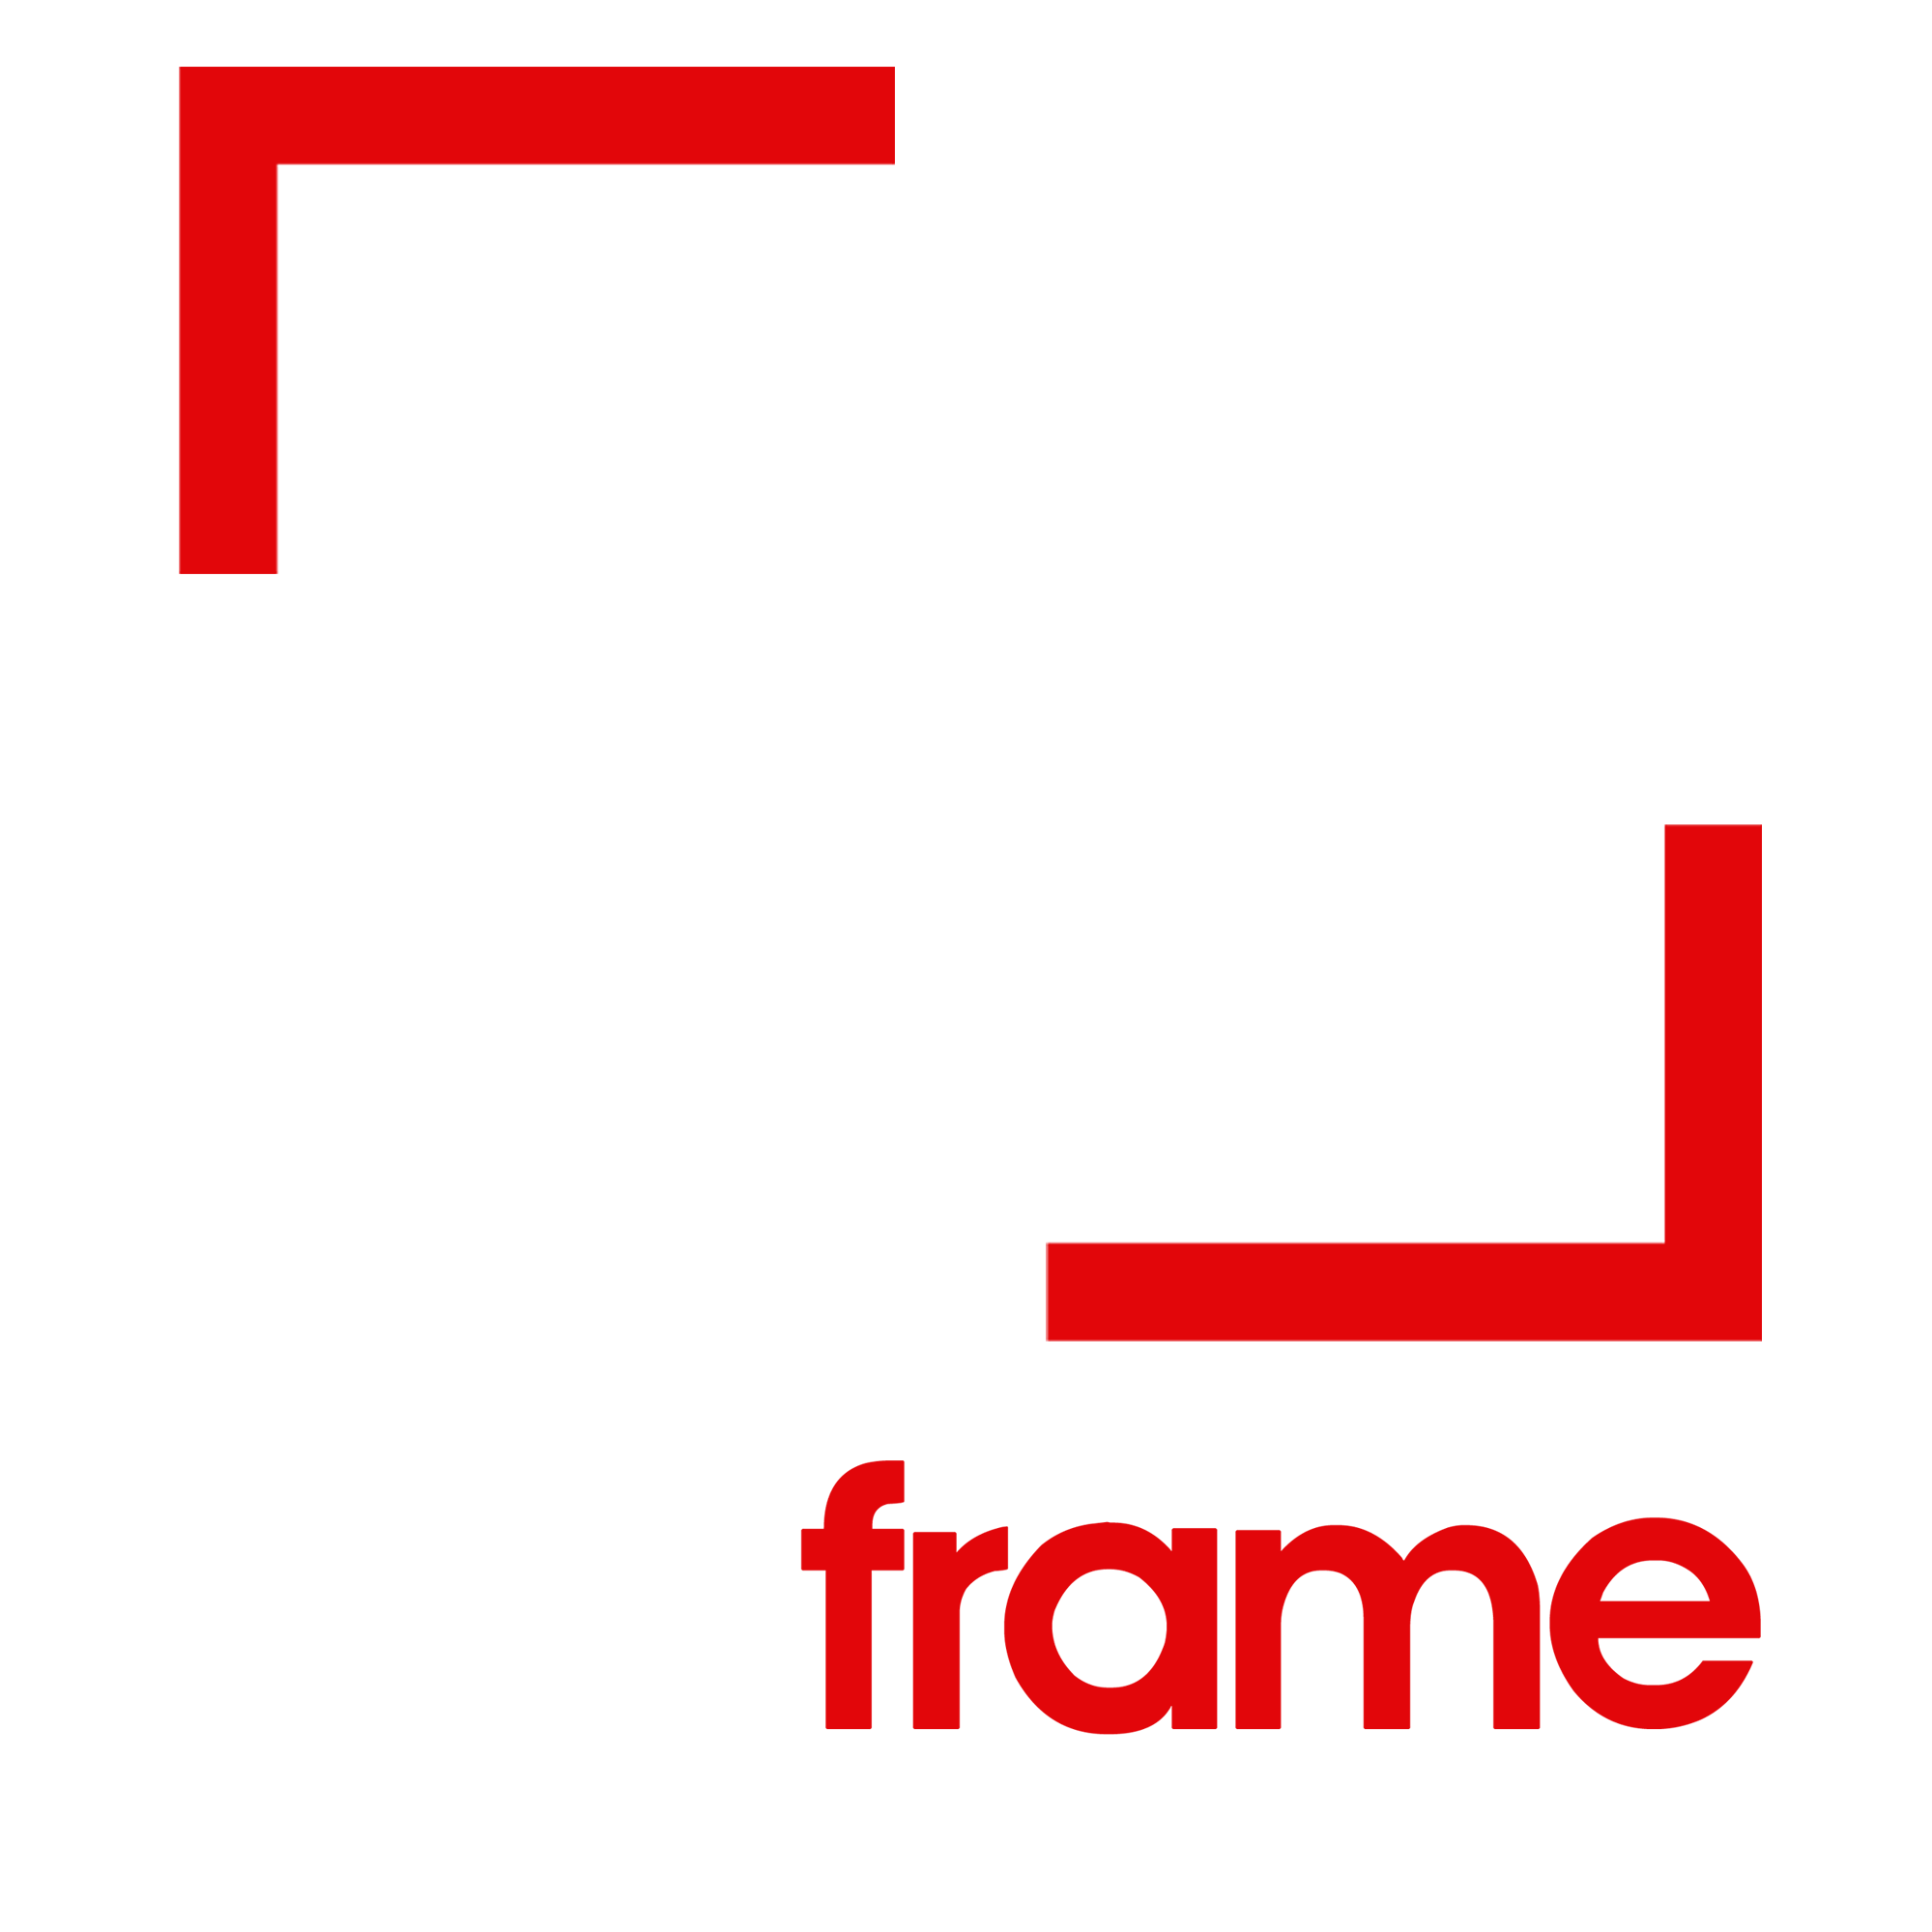 What Company Has a Red Square Logo - Photography Websites with Portfolio, Customization, Shopping Cart ...